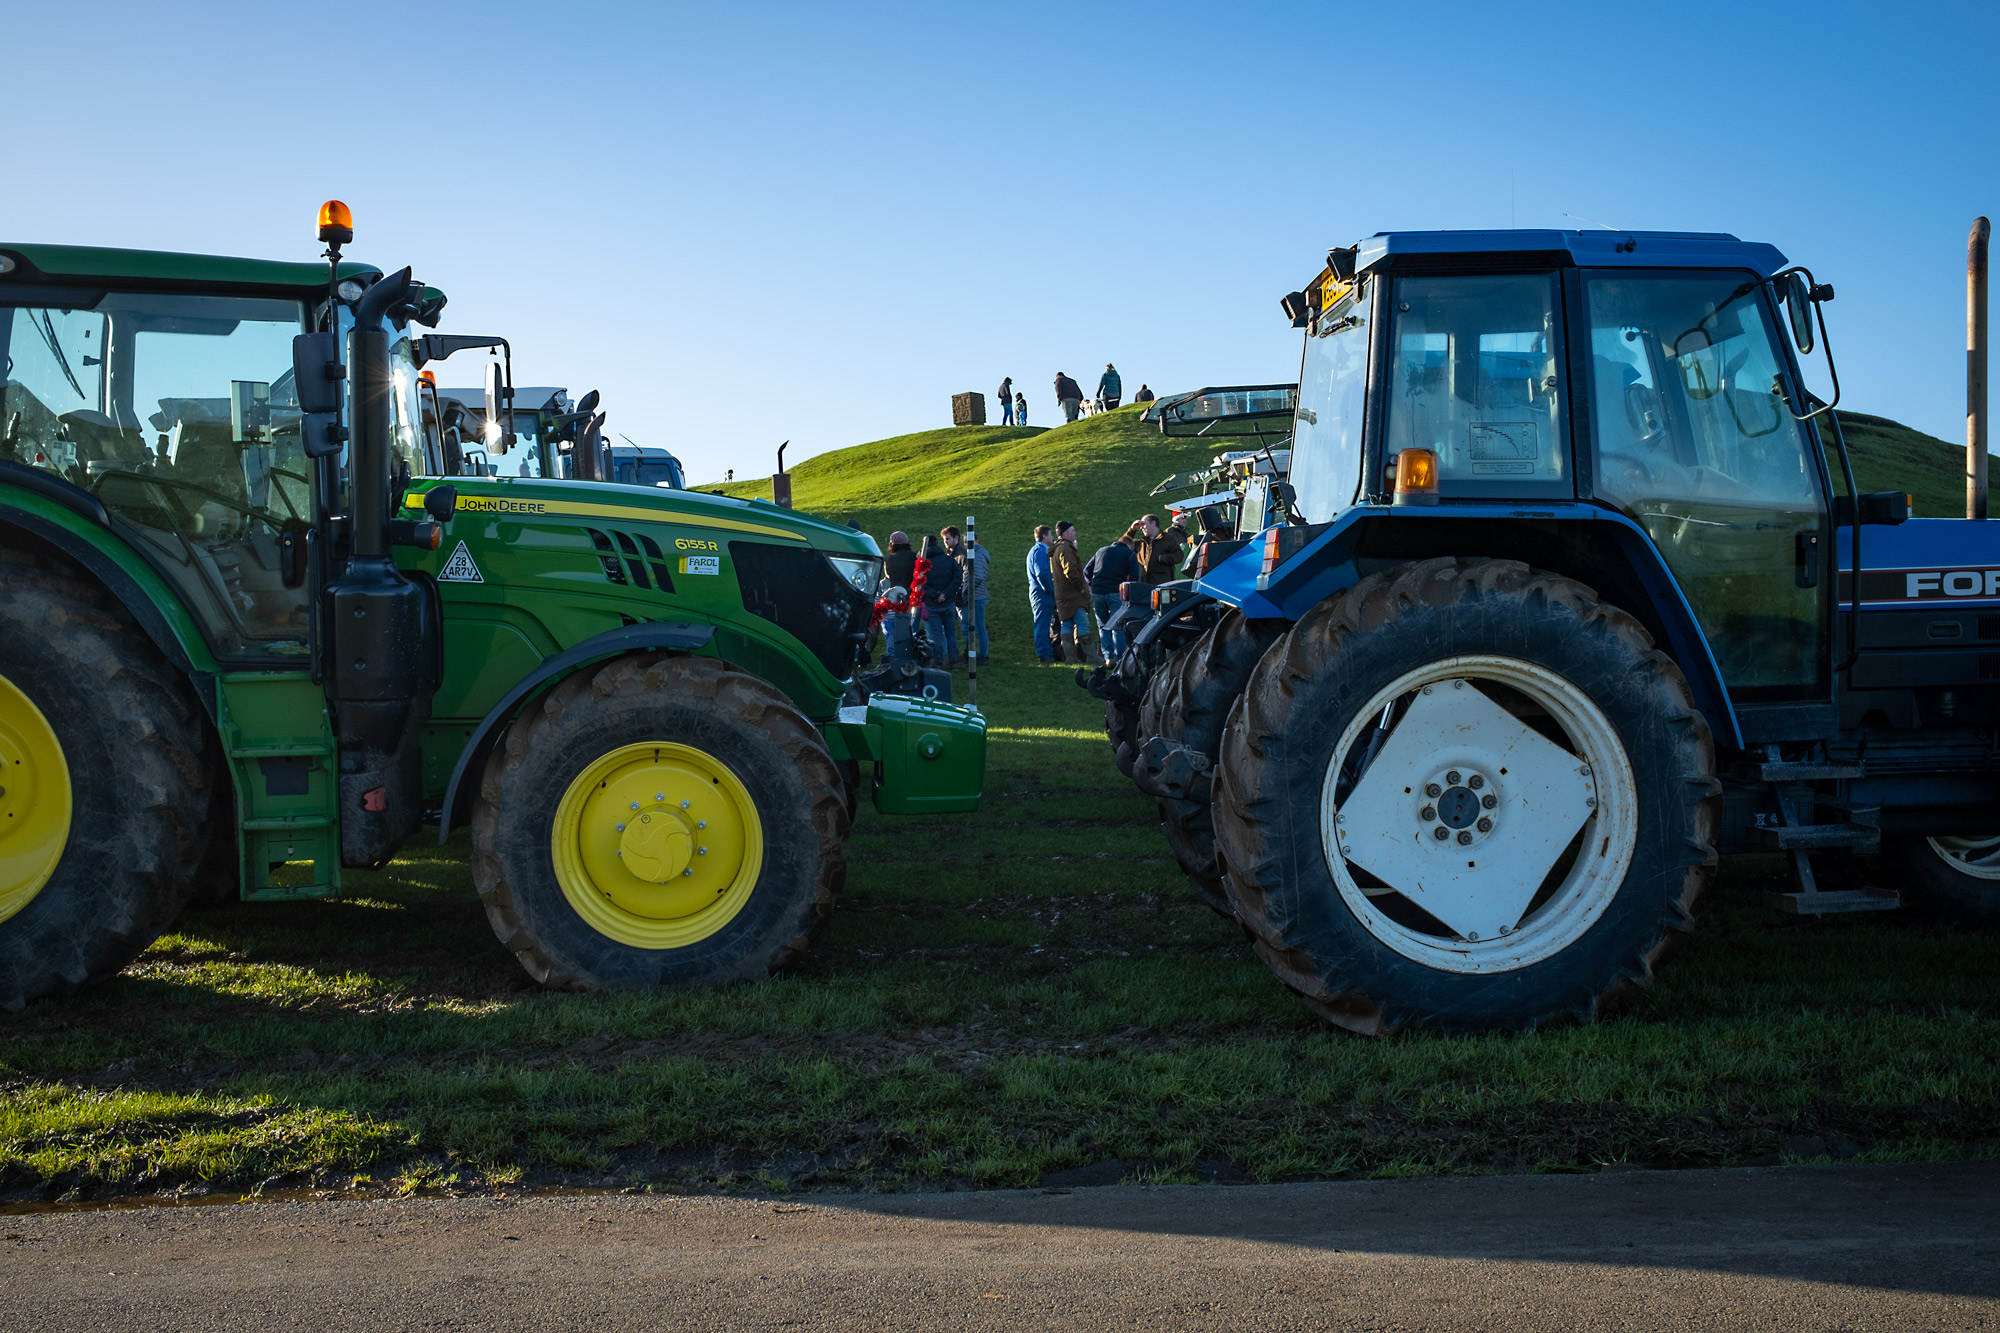 Tractors lined up for a meeting